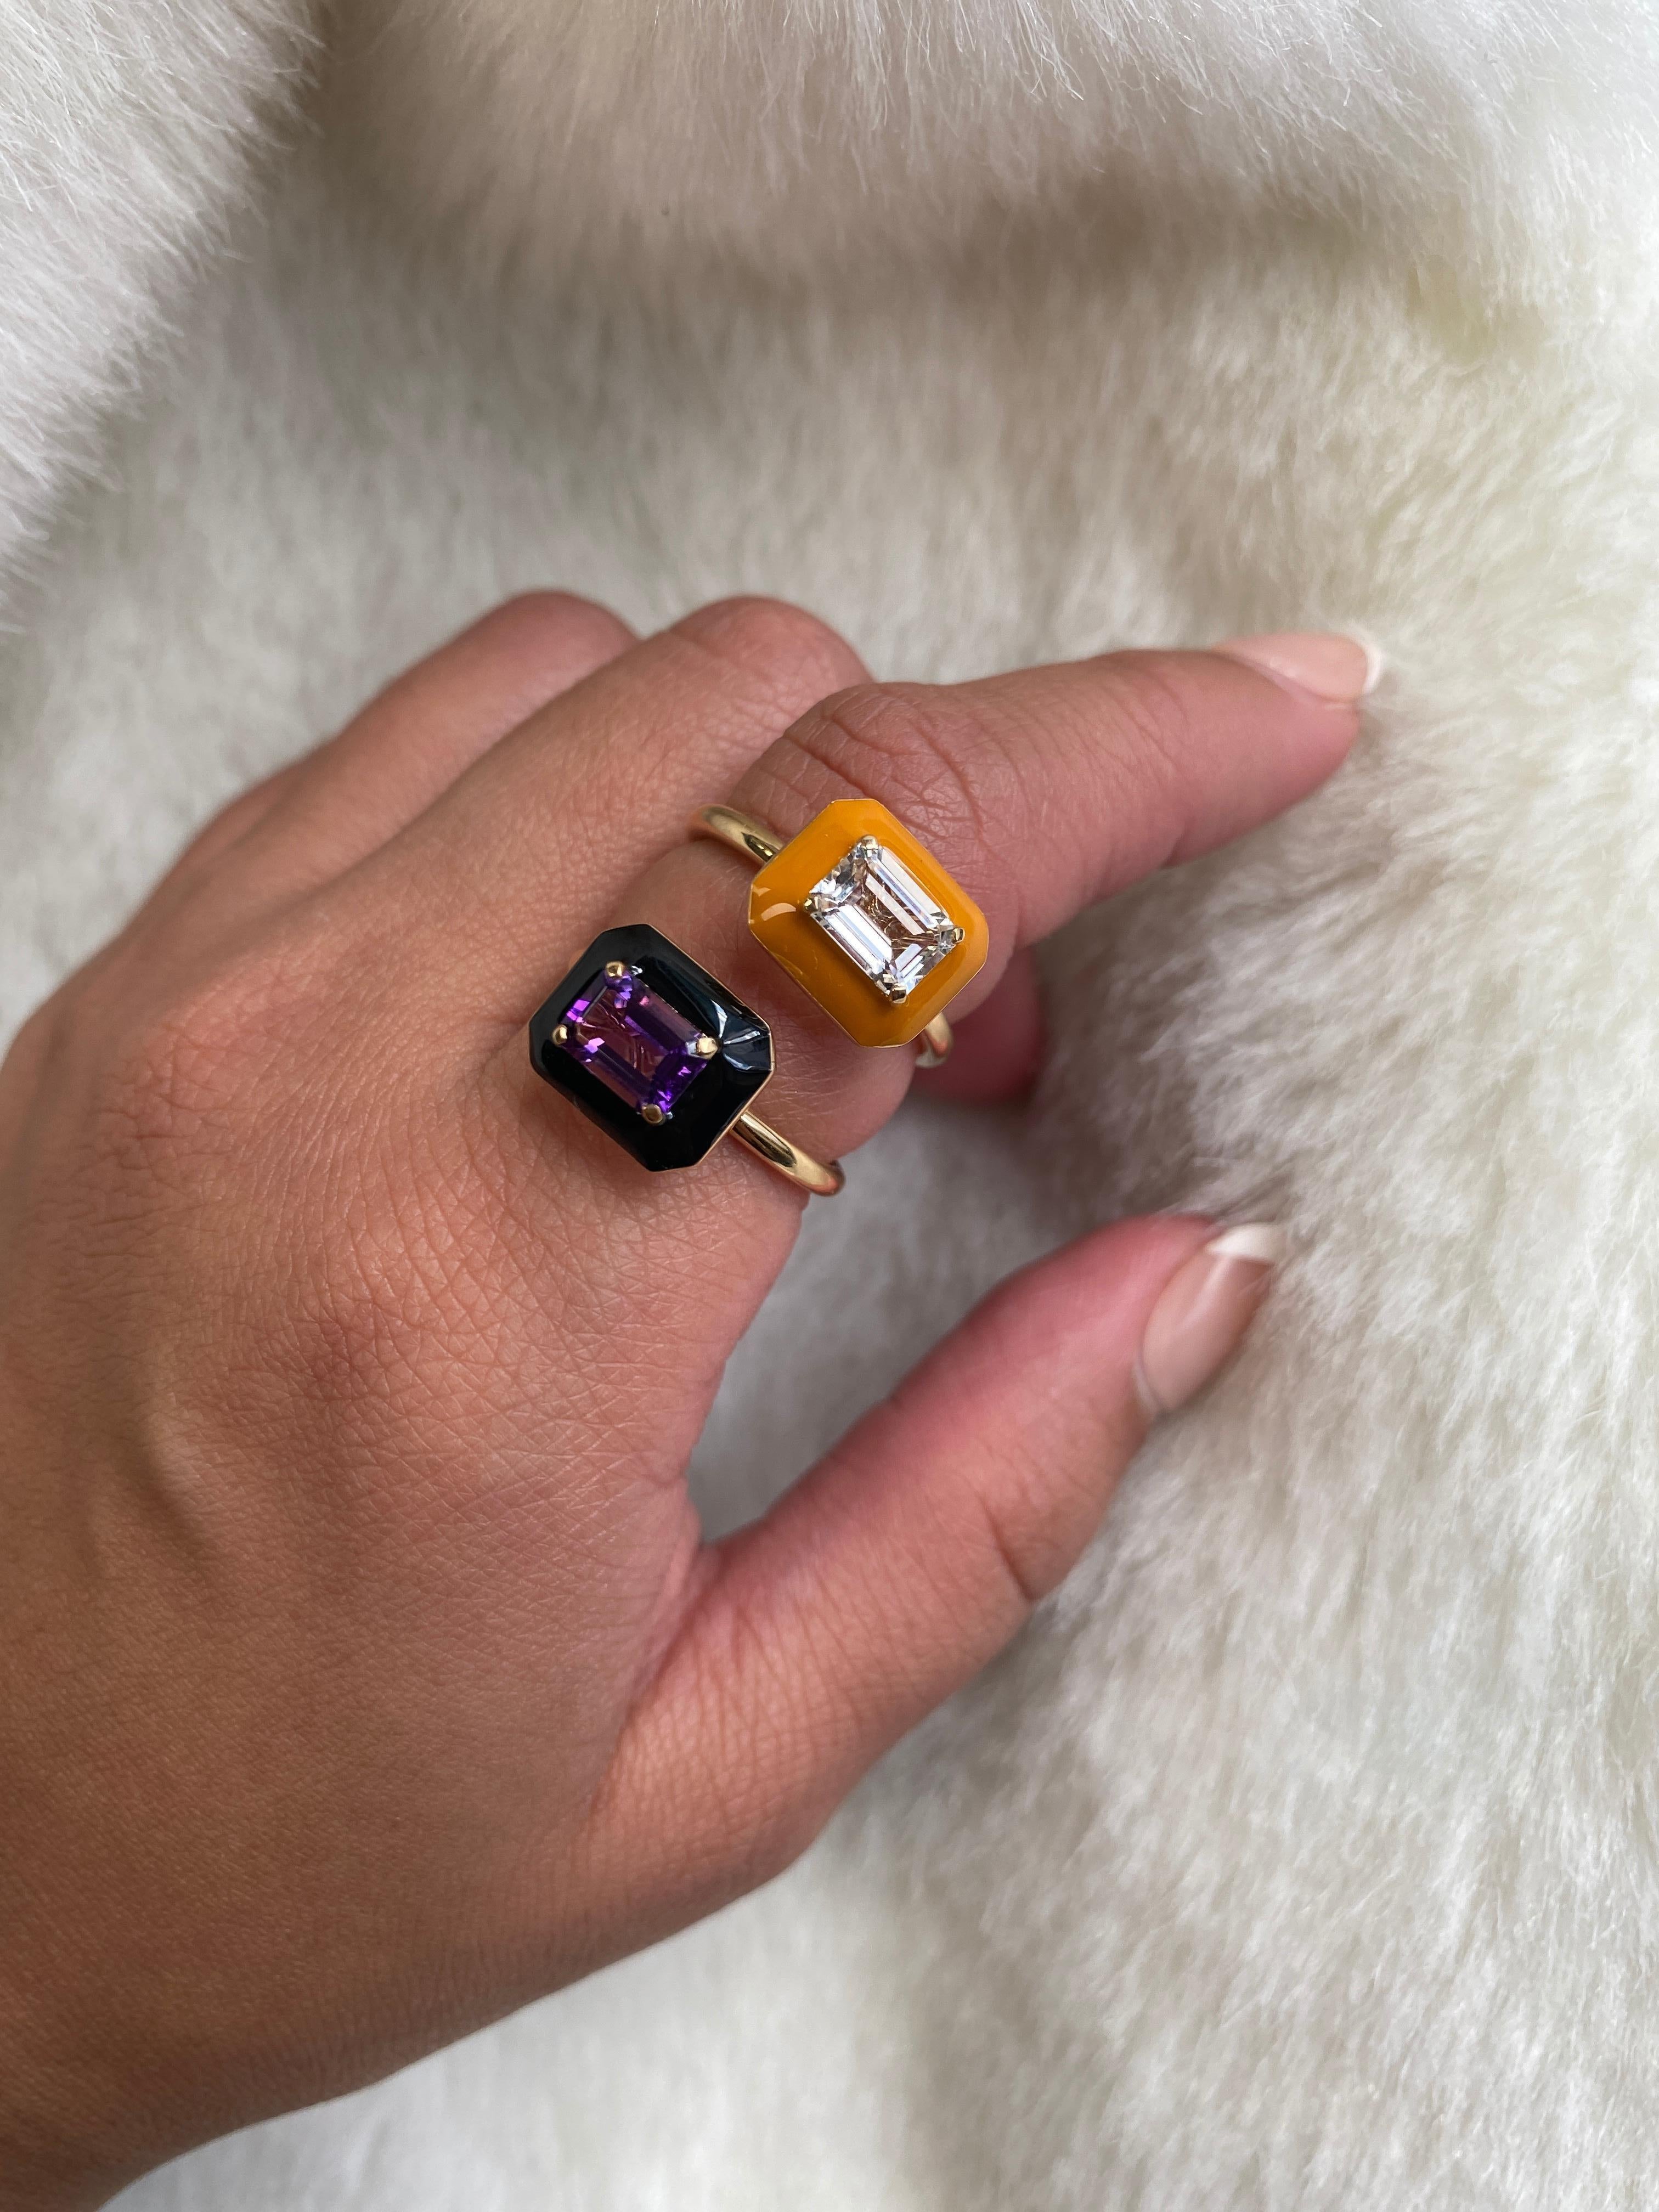 This is an outstanding Rock Crystal Emerald Cut East-West Ring with Brown Enamel, set in 18K Yellow Gold. From our ‘Queen’ Collection, it was inspired by royalty, but with a modern twist. The combination of enamel, and Rock Crystal represents power,